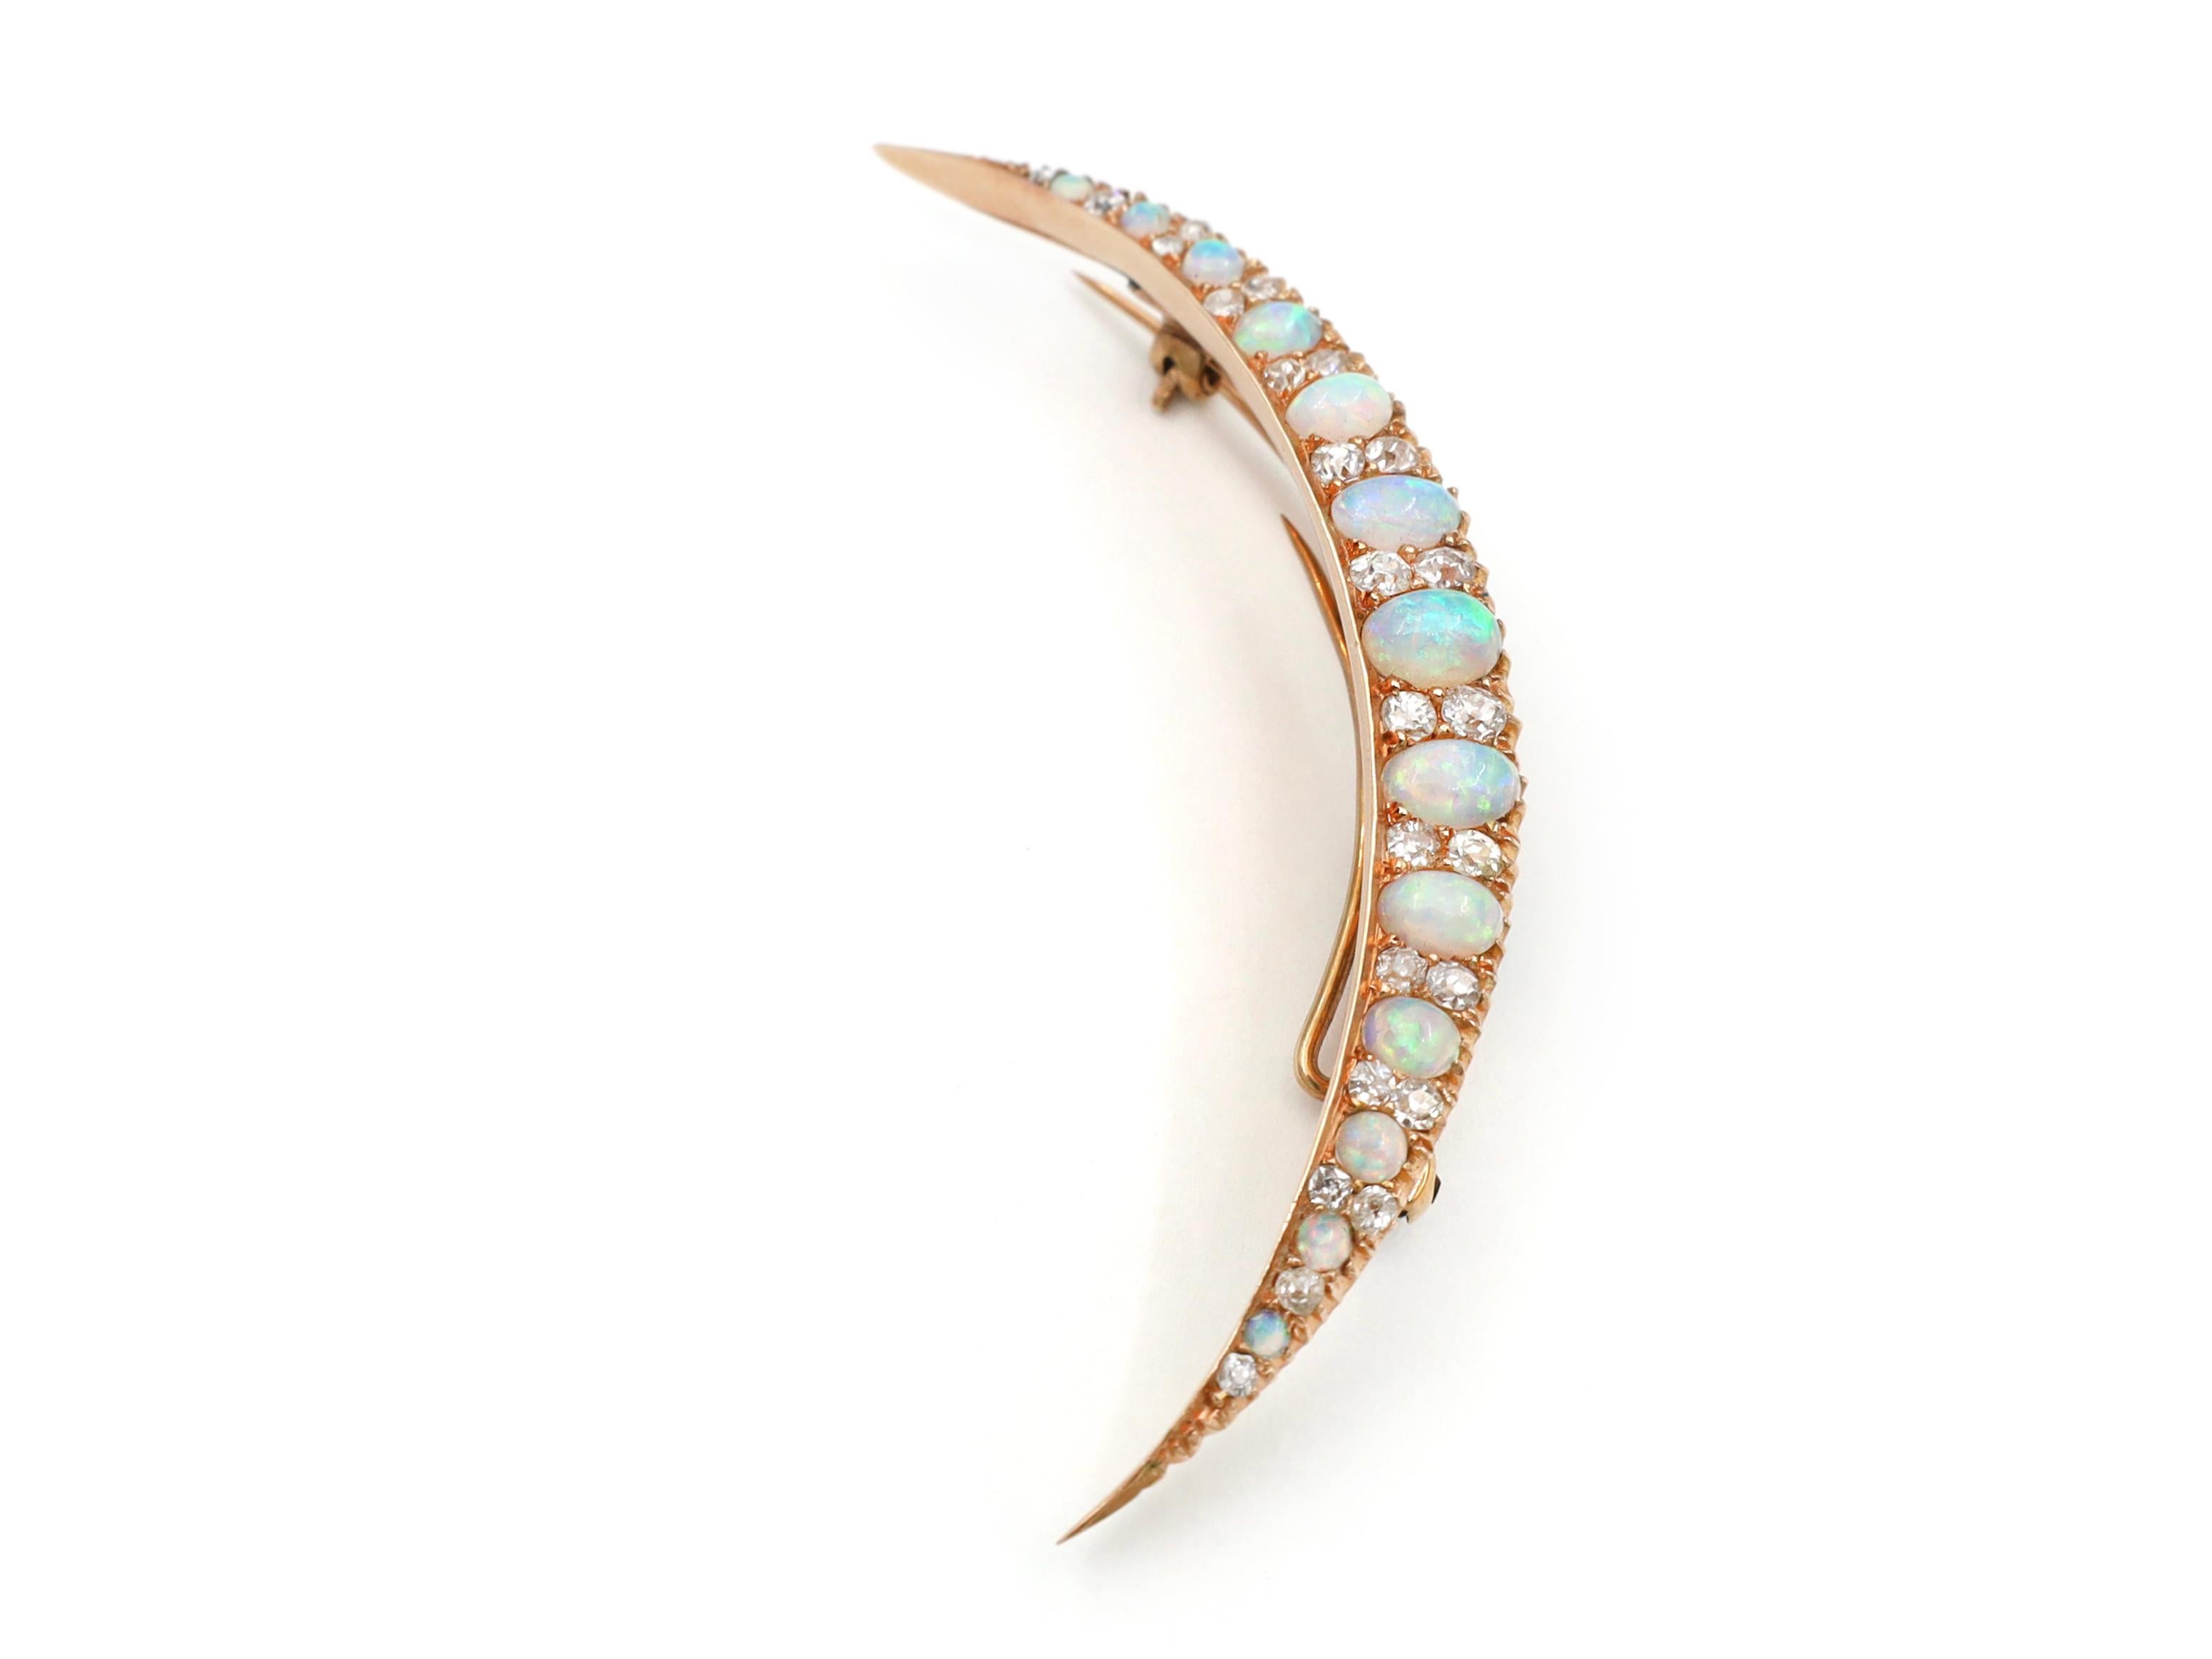 Victorian opal and diamond crescent moon brooch in 18kt yellow gold. Set with thirteen graduating oval and round cabochon precious opals in grain settings, each alternating with diamond set intervals set with round old cut diamonds in grain